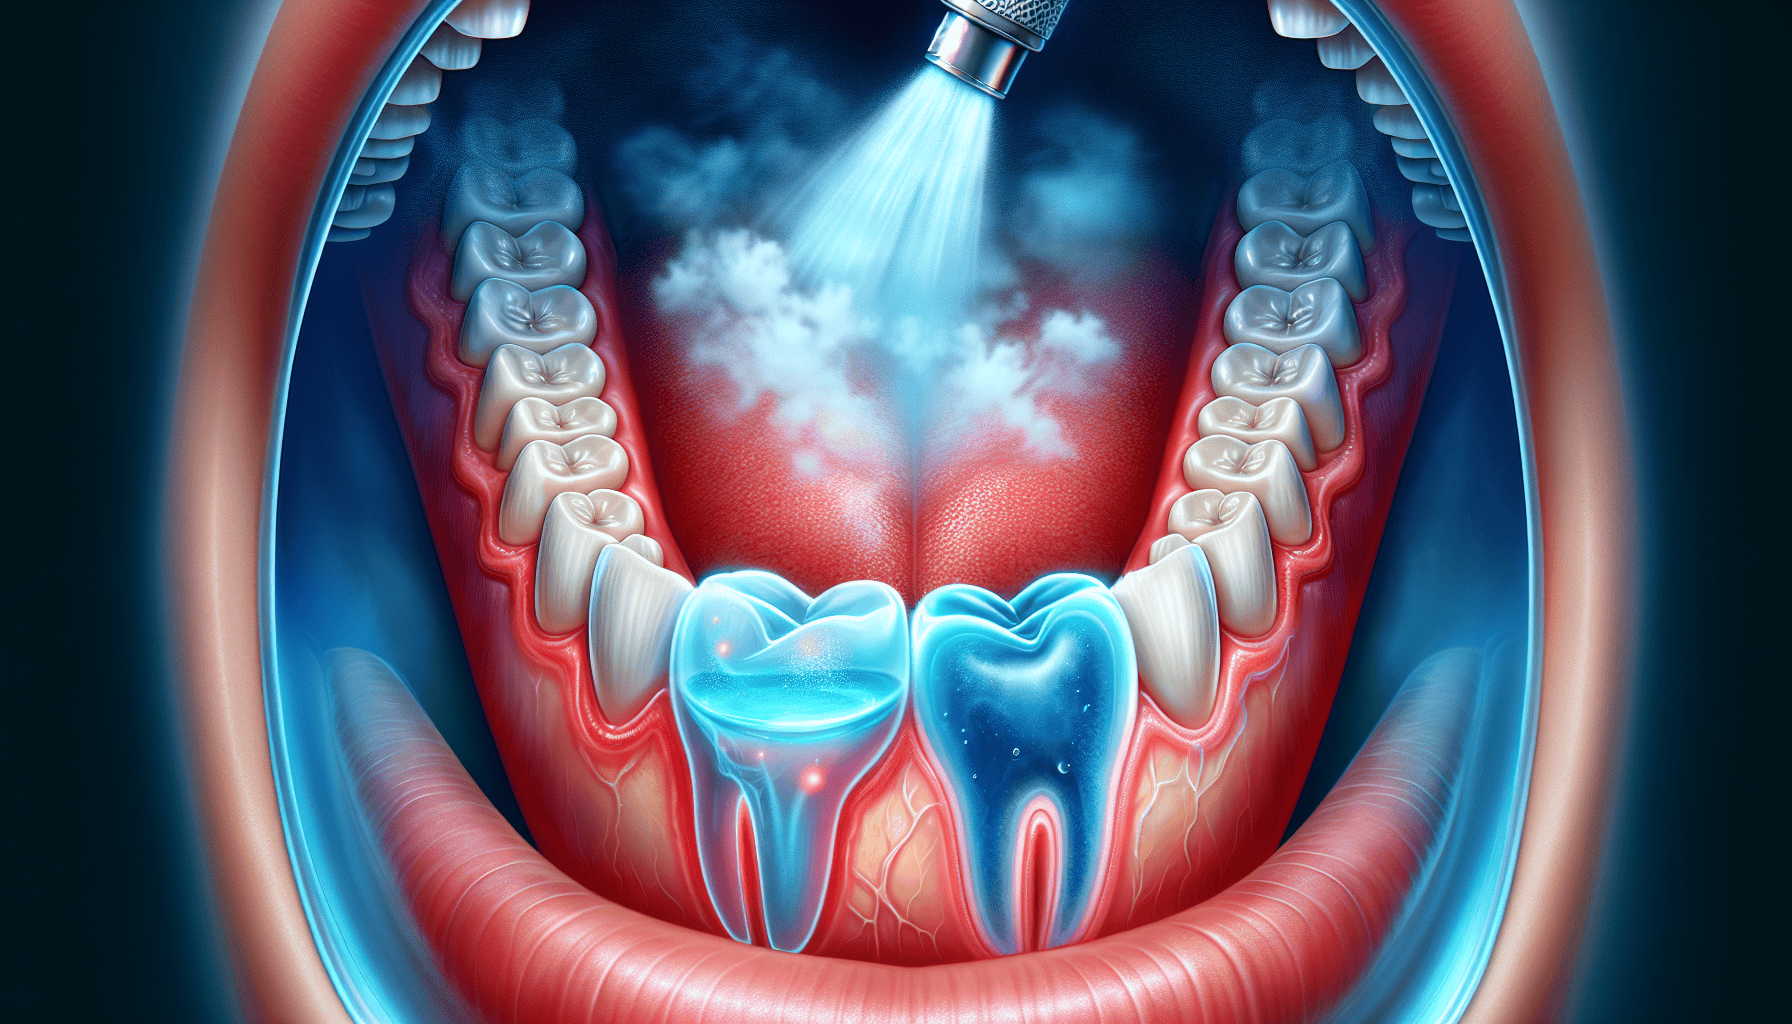 Illustration of ozone therapy for periodontal disease